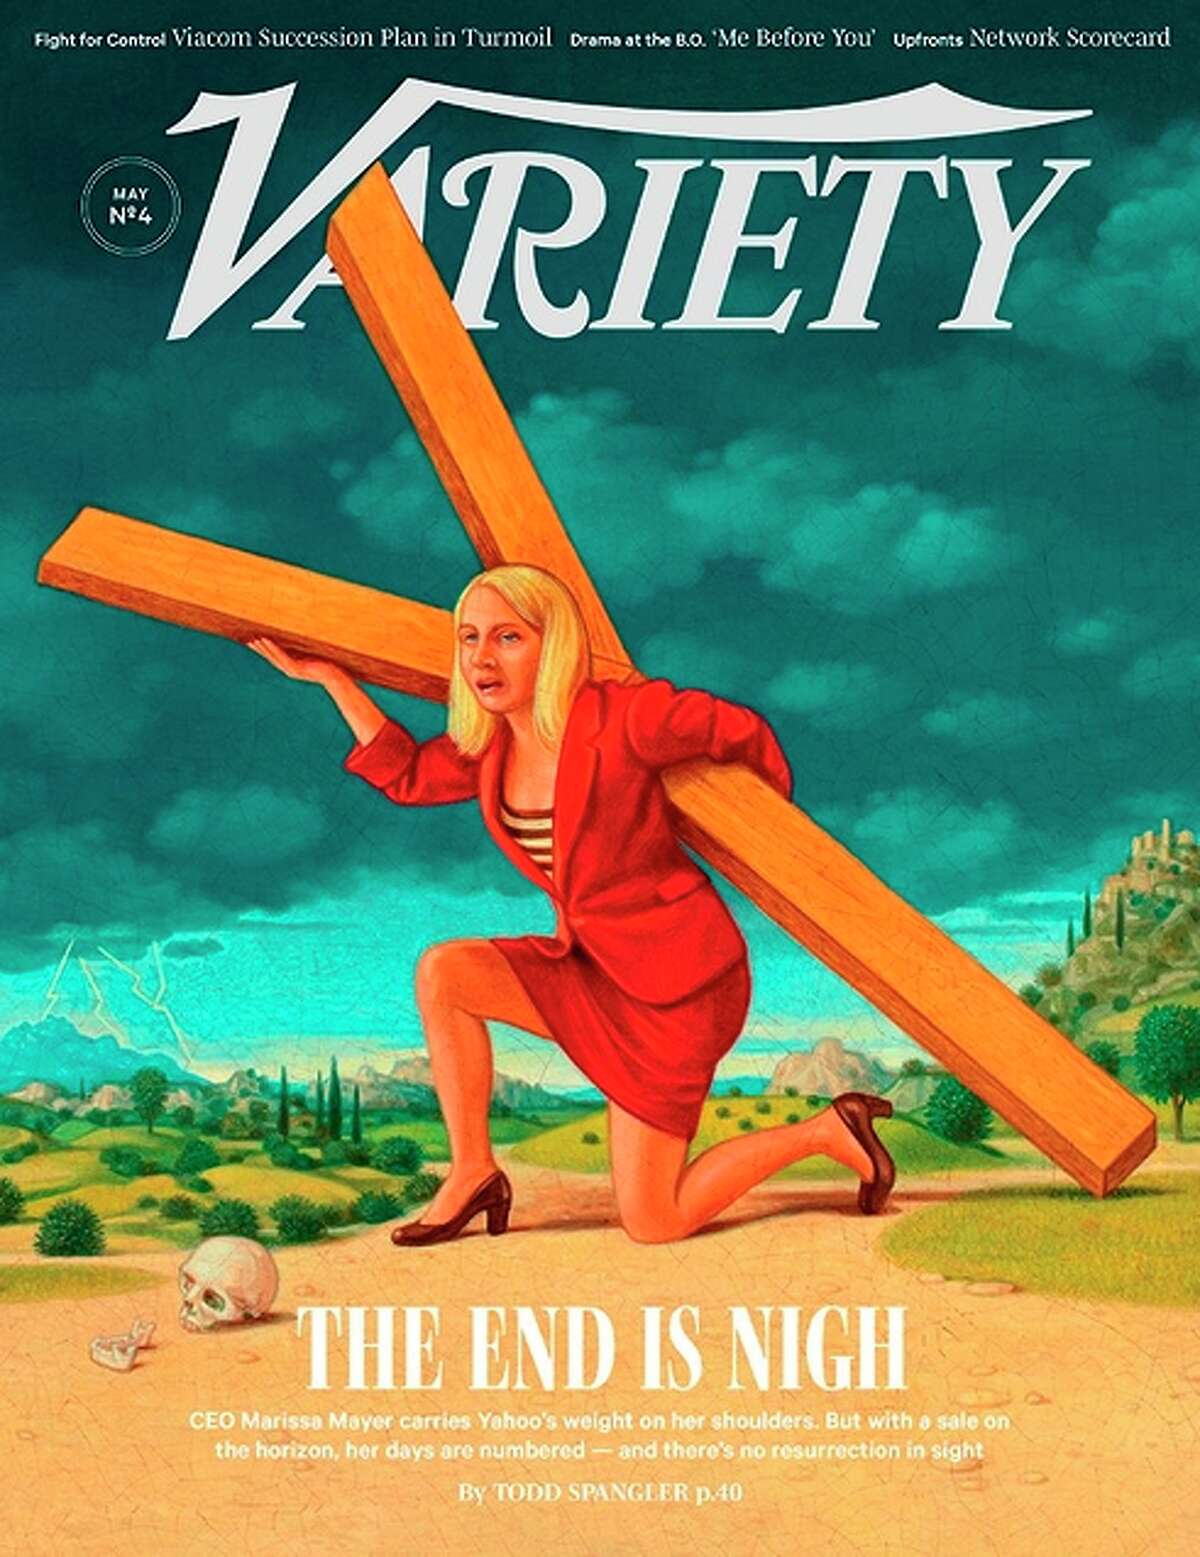 Variety editor Andrew Wallenstein tweeted this upcoming magazine cover on Tuesday, May 24.